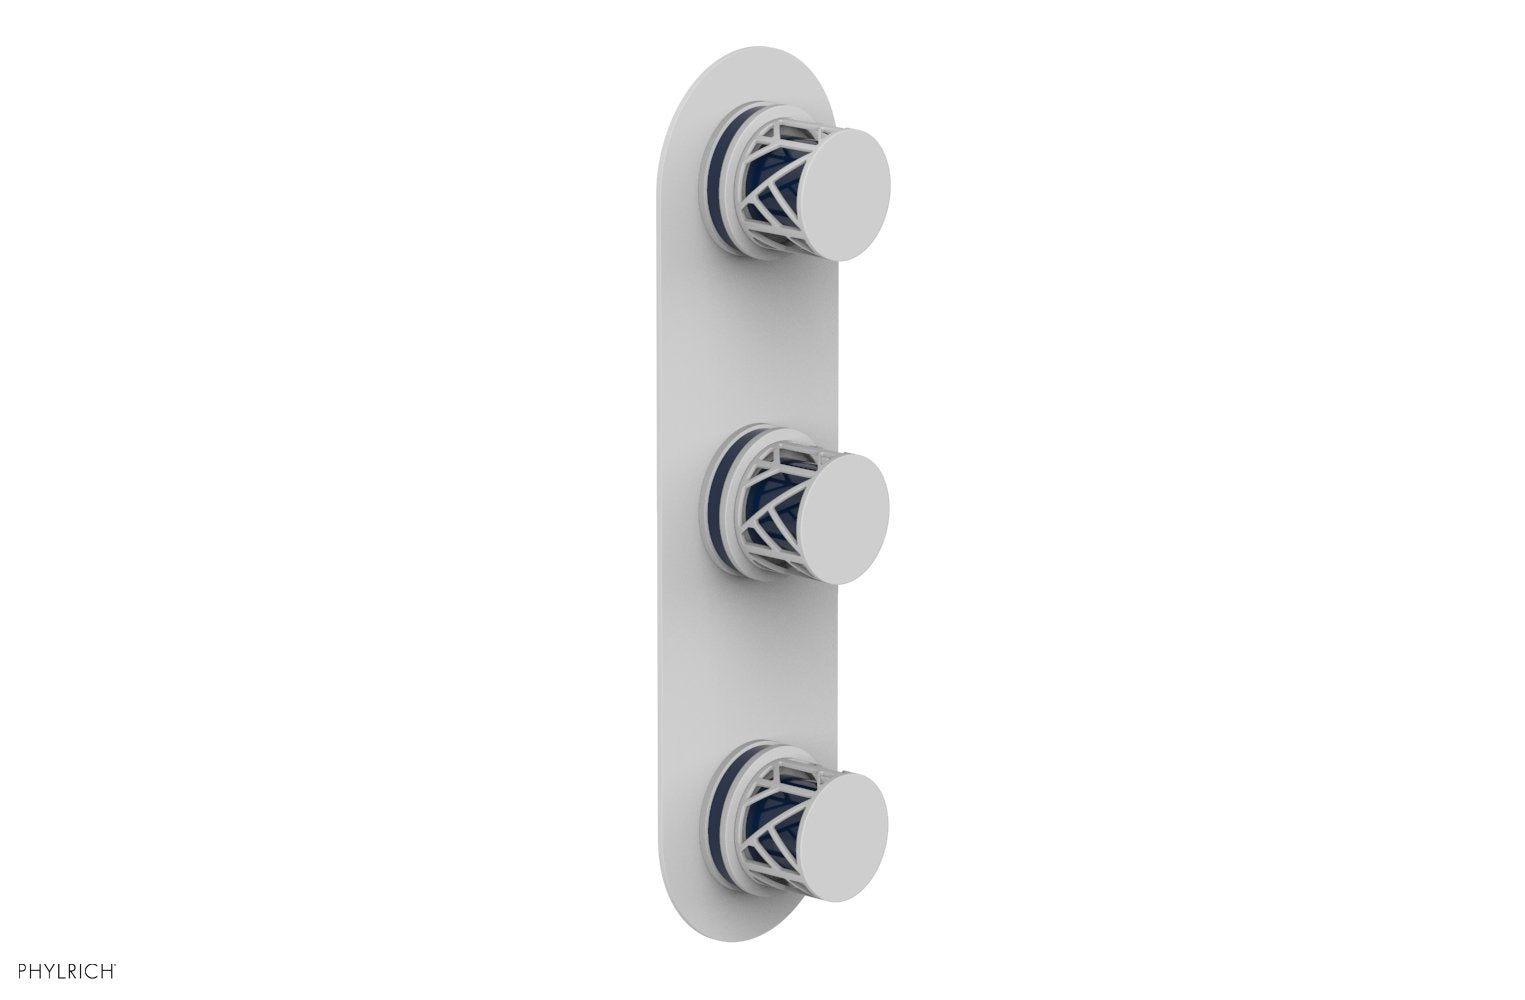 Phylrich JOLIE Thermostatic Valve with Two Volume Control with "Navy Blue" Accents